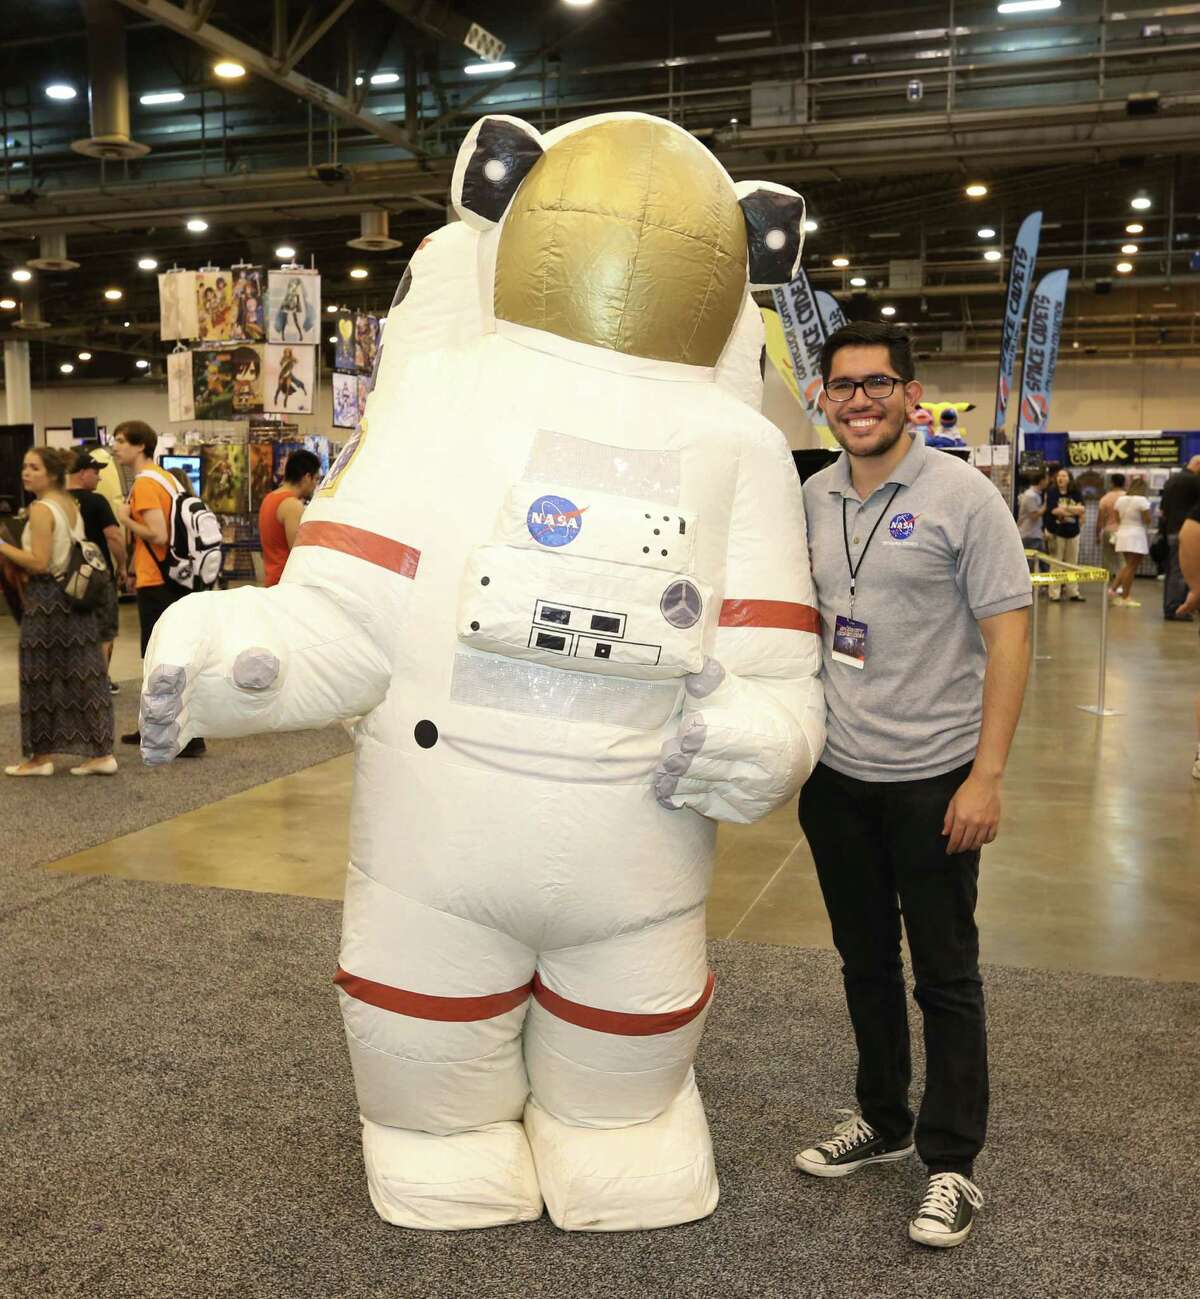 Fans pose for a photo at Space City Comic Con at NRG Center last year. The event takes place over the Memorial Day weekend.